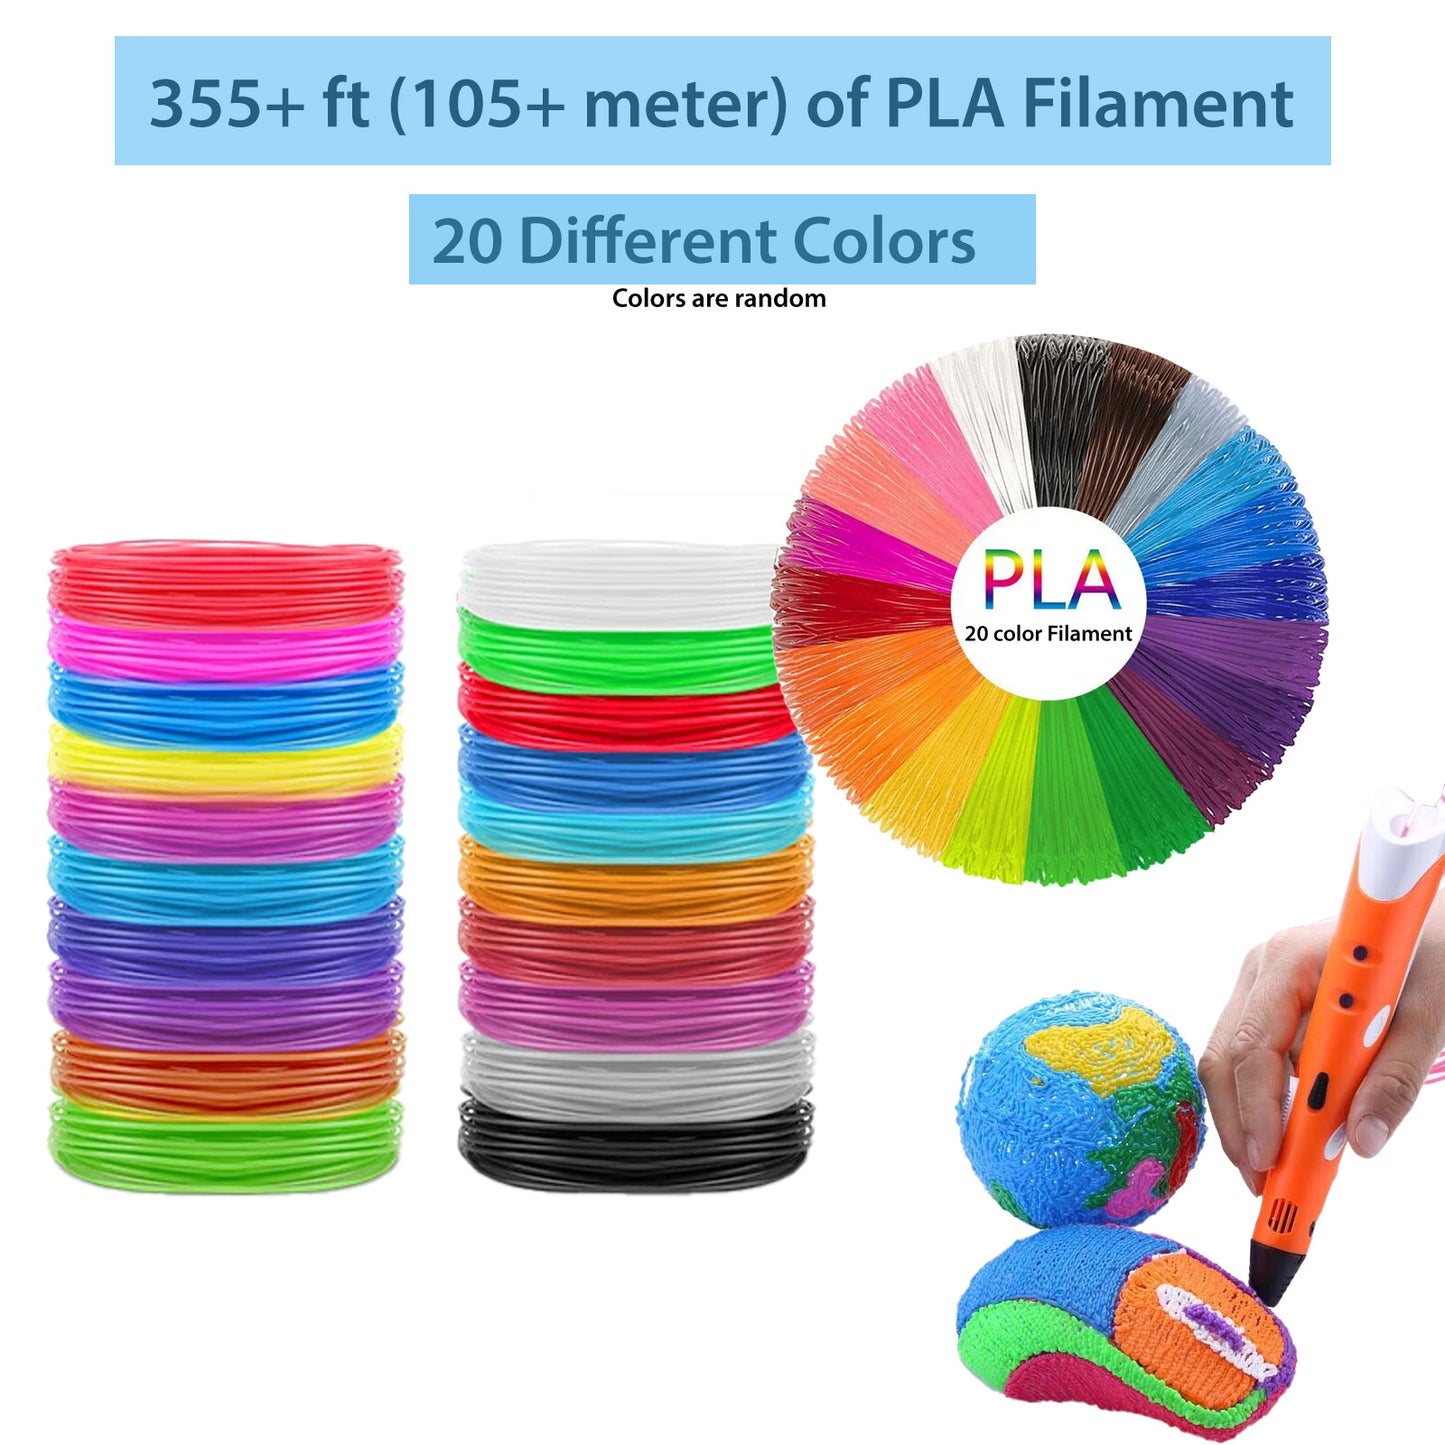 3D Printing Pen Drawing Ultimate Set for kids Christmas gift - 20 Colors 355+ Feet Filament